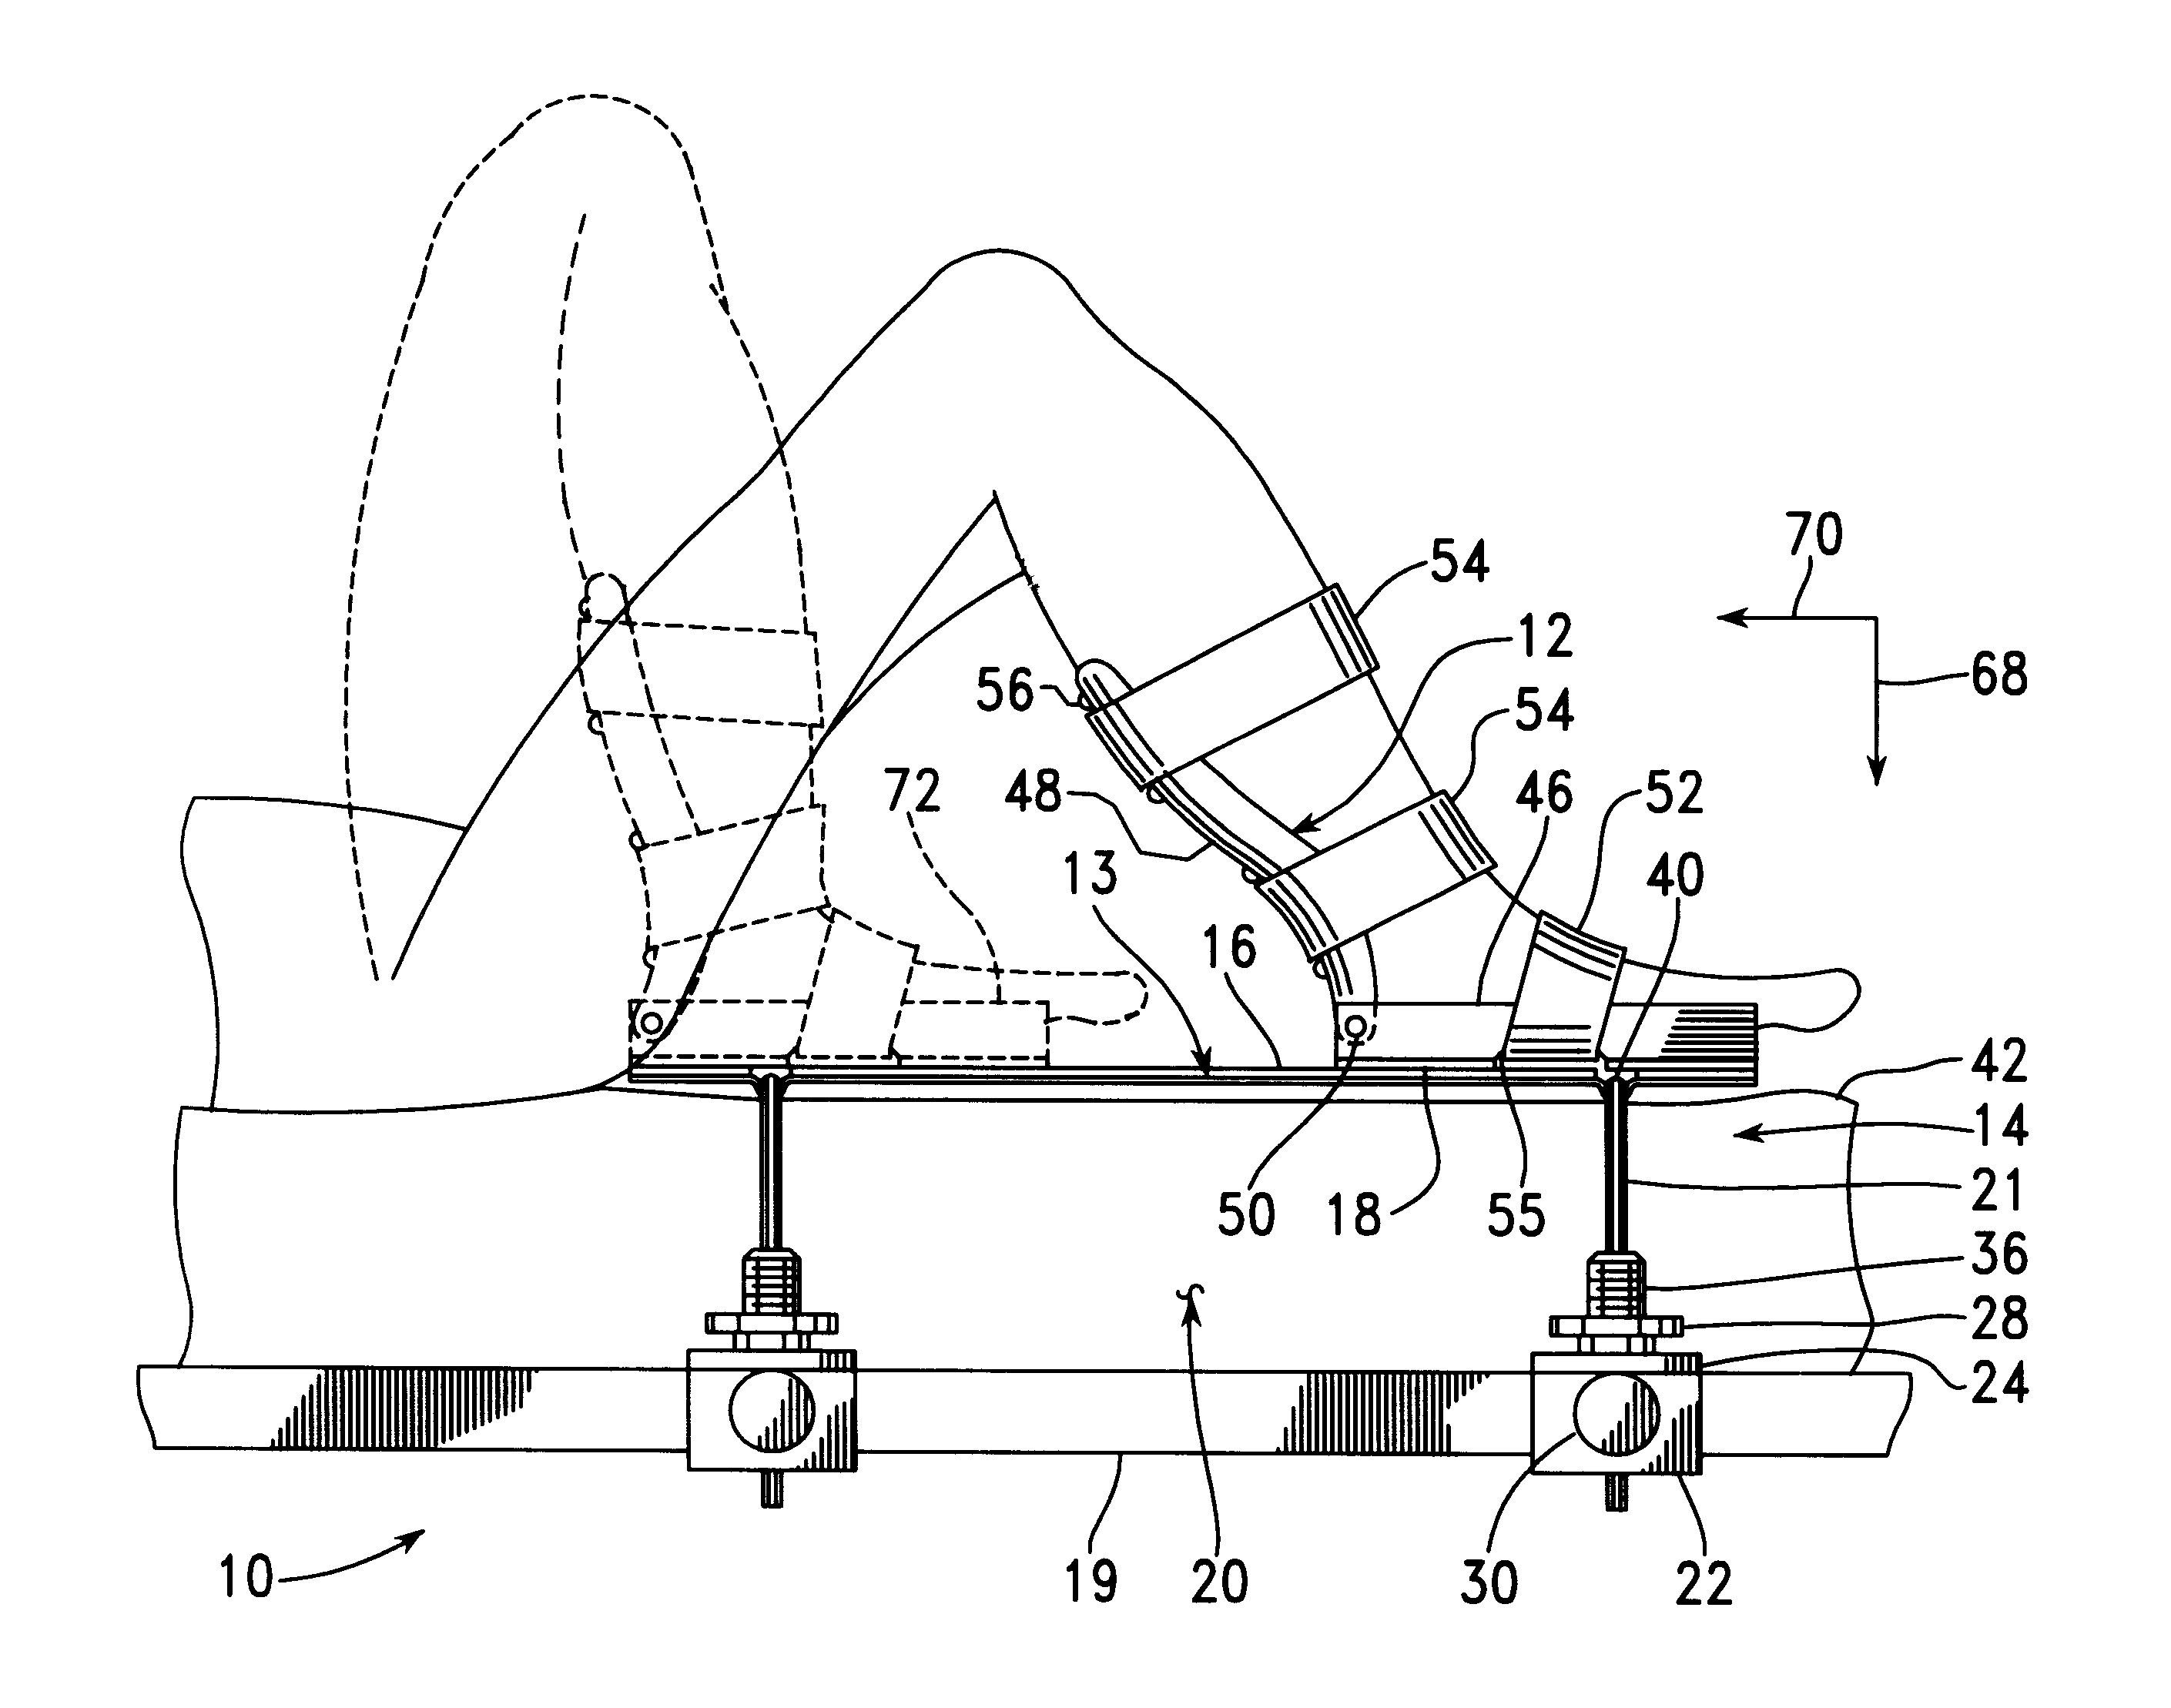 Foot restraint apparatus for holding a leg in place during knee surgery